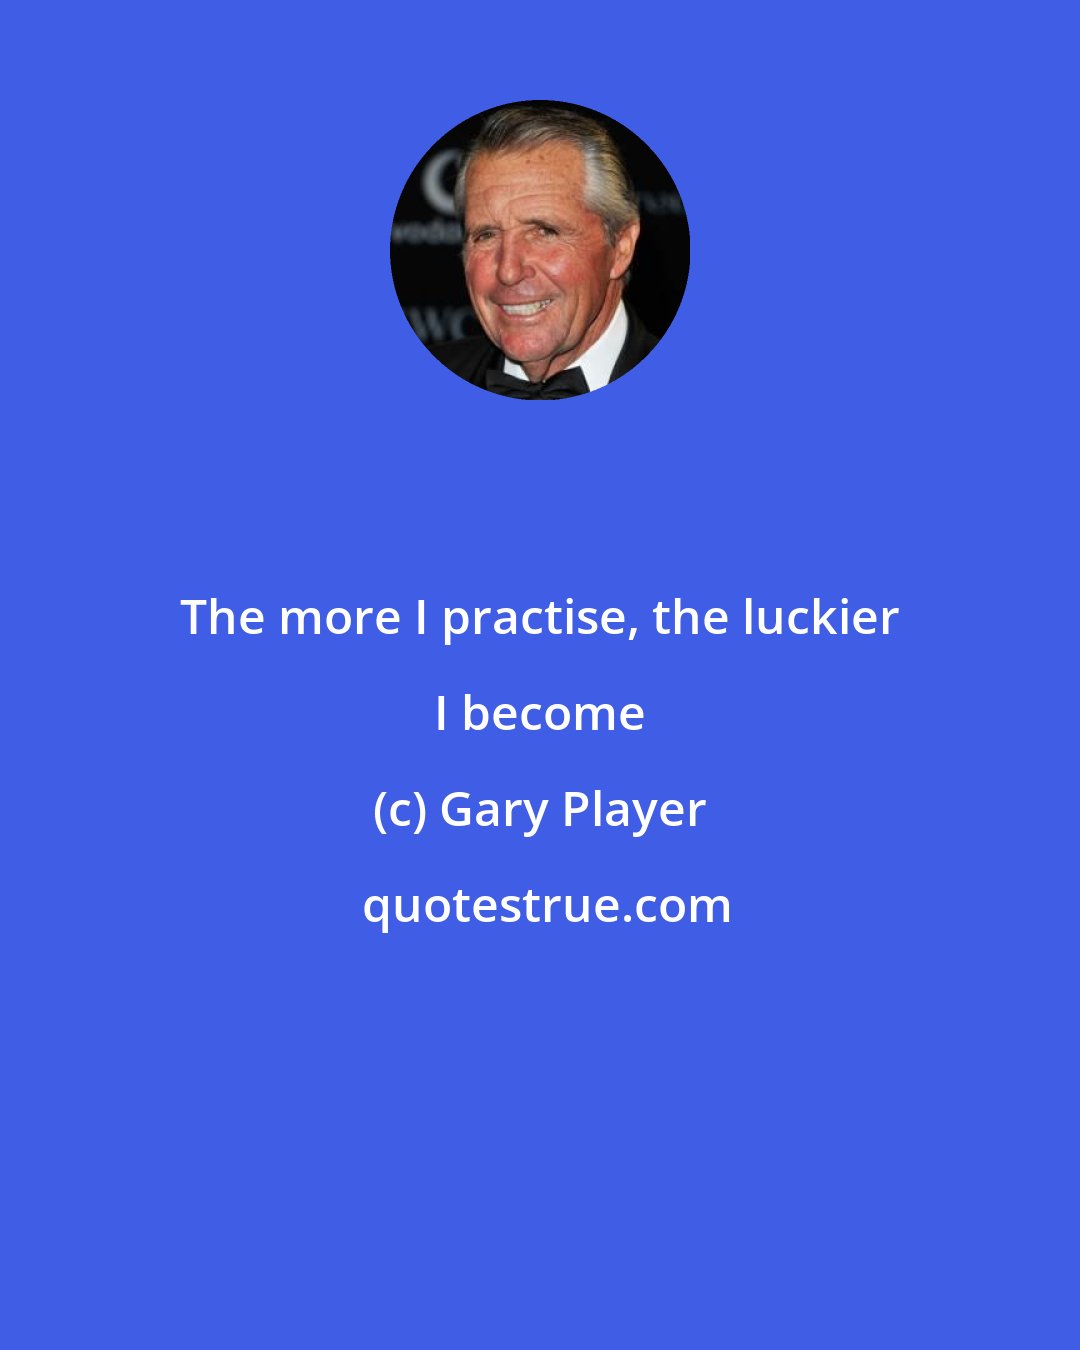 Gary Player: The more I practise, the luckier I become